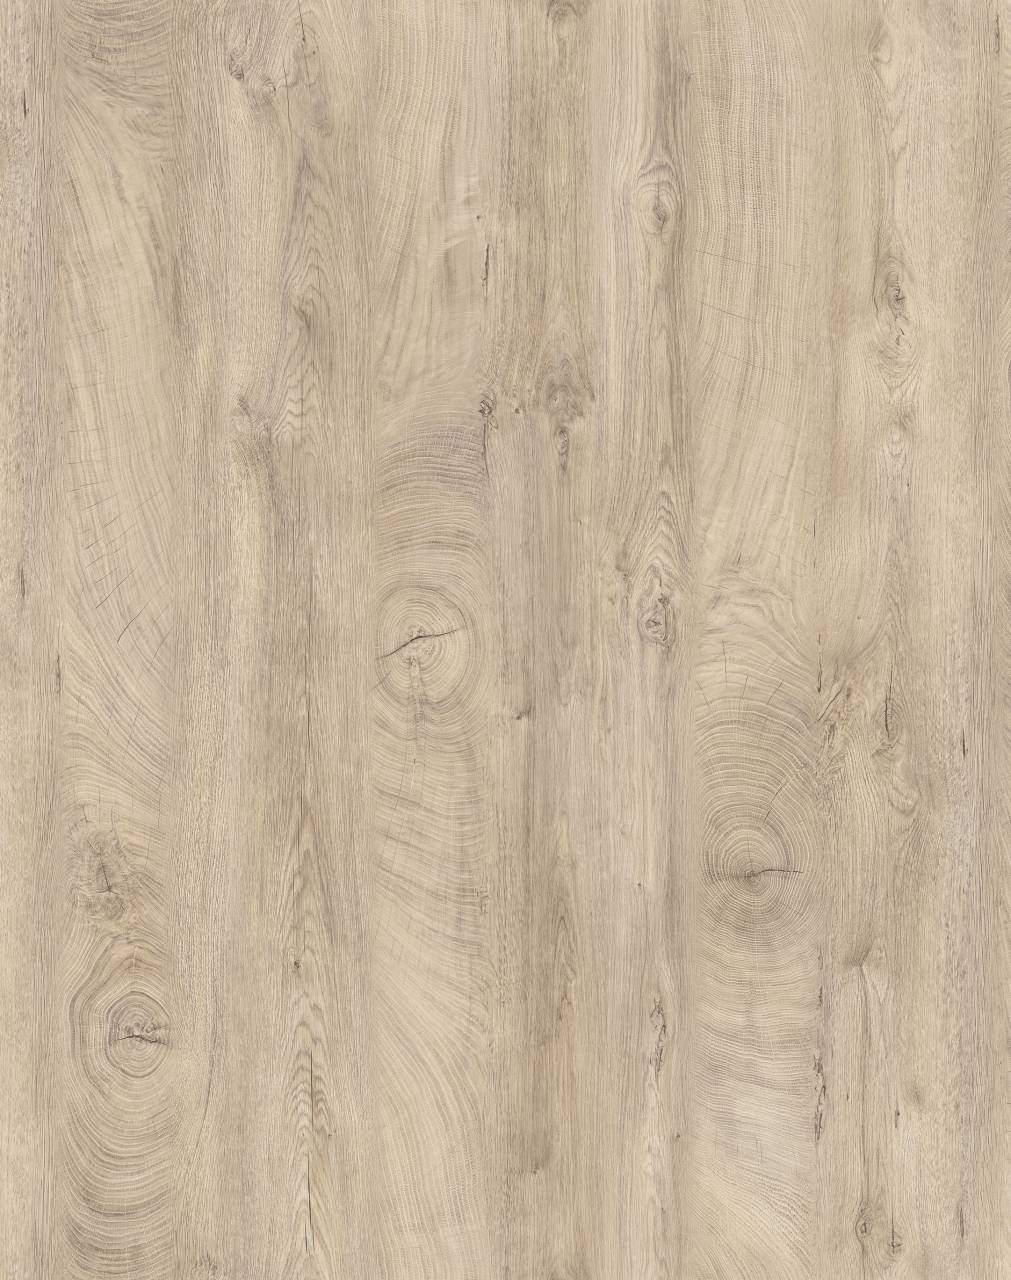 Elegance Endgrain Oak PW HPL with textured surface and warm brown tones for a sophisticated look.